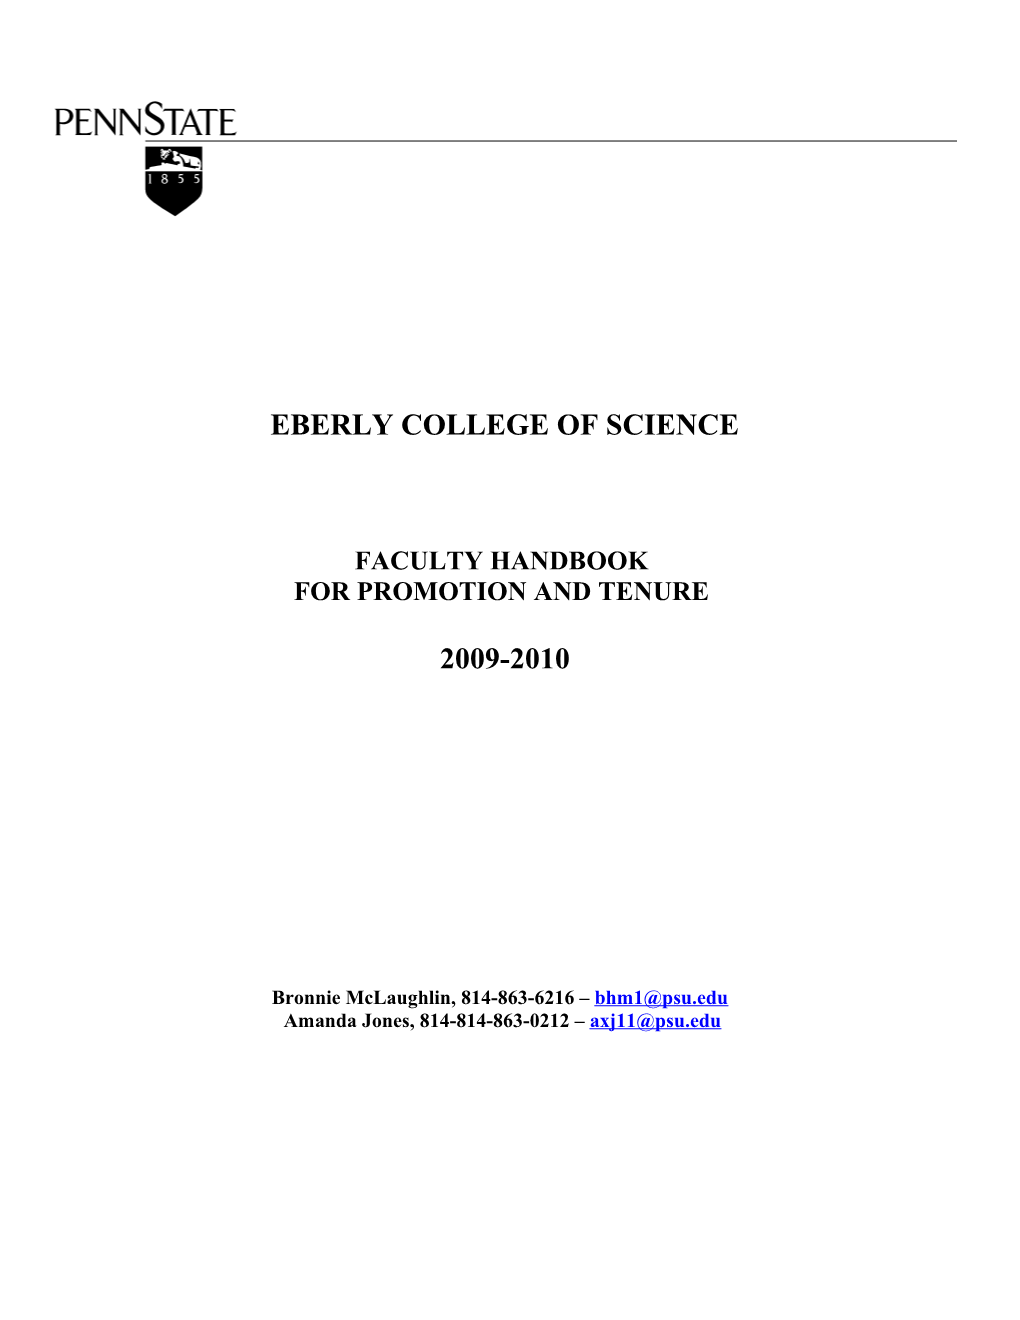 Handbook for Promotion and Tenure